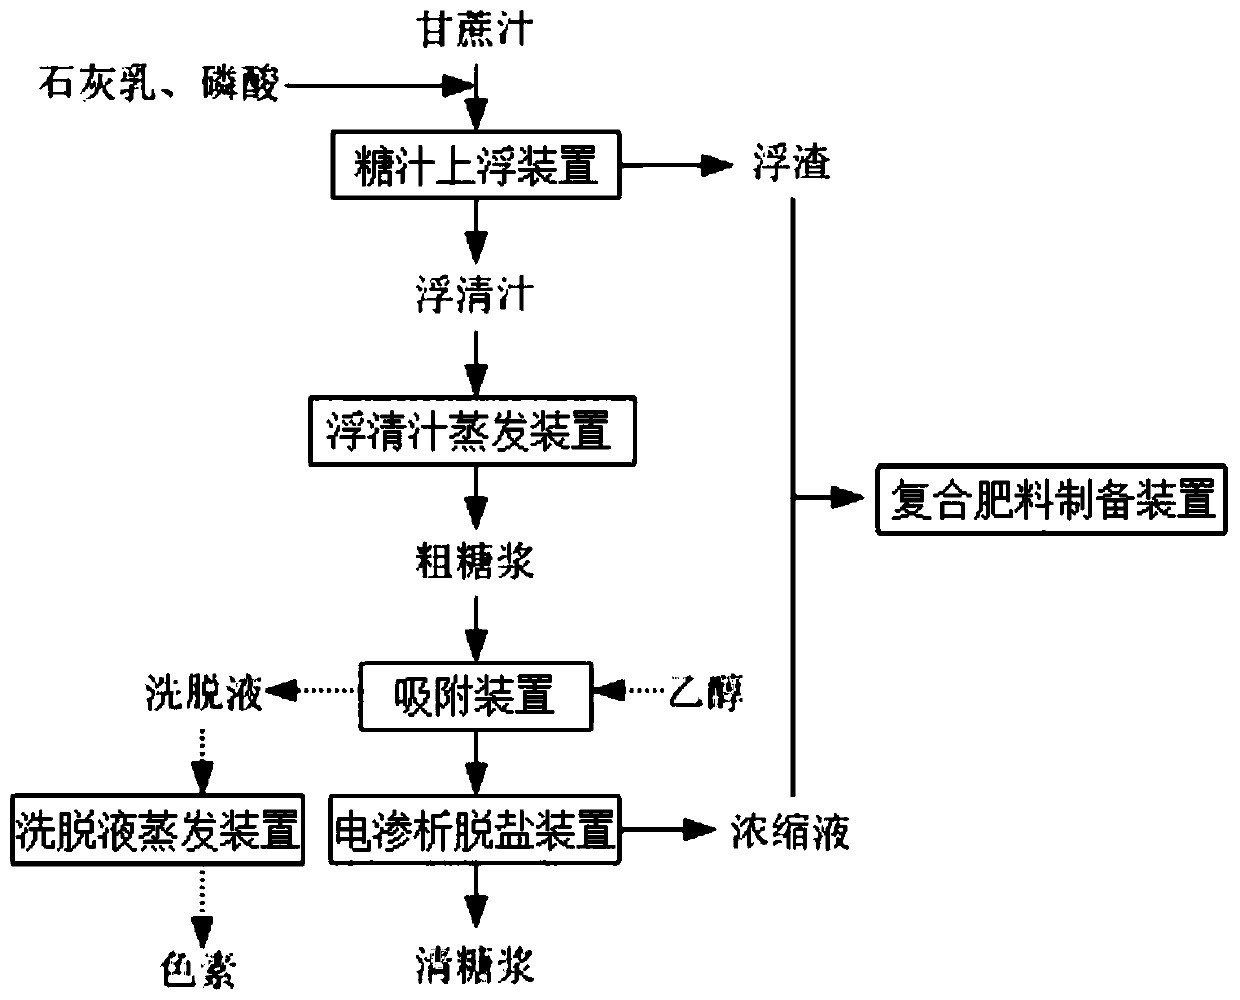 Sugar cane juice sulfur-free clarification and desalination system and method